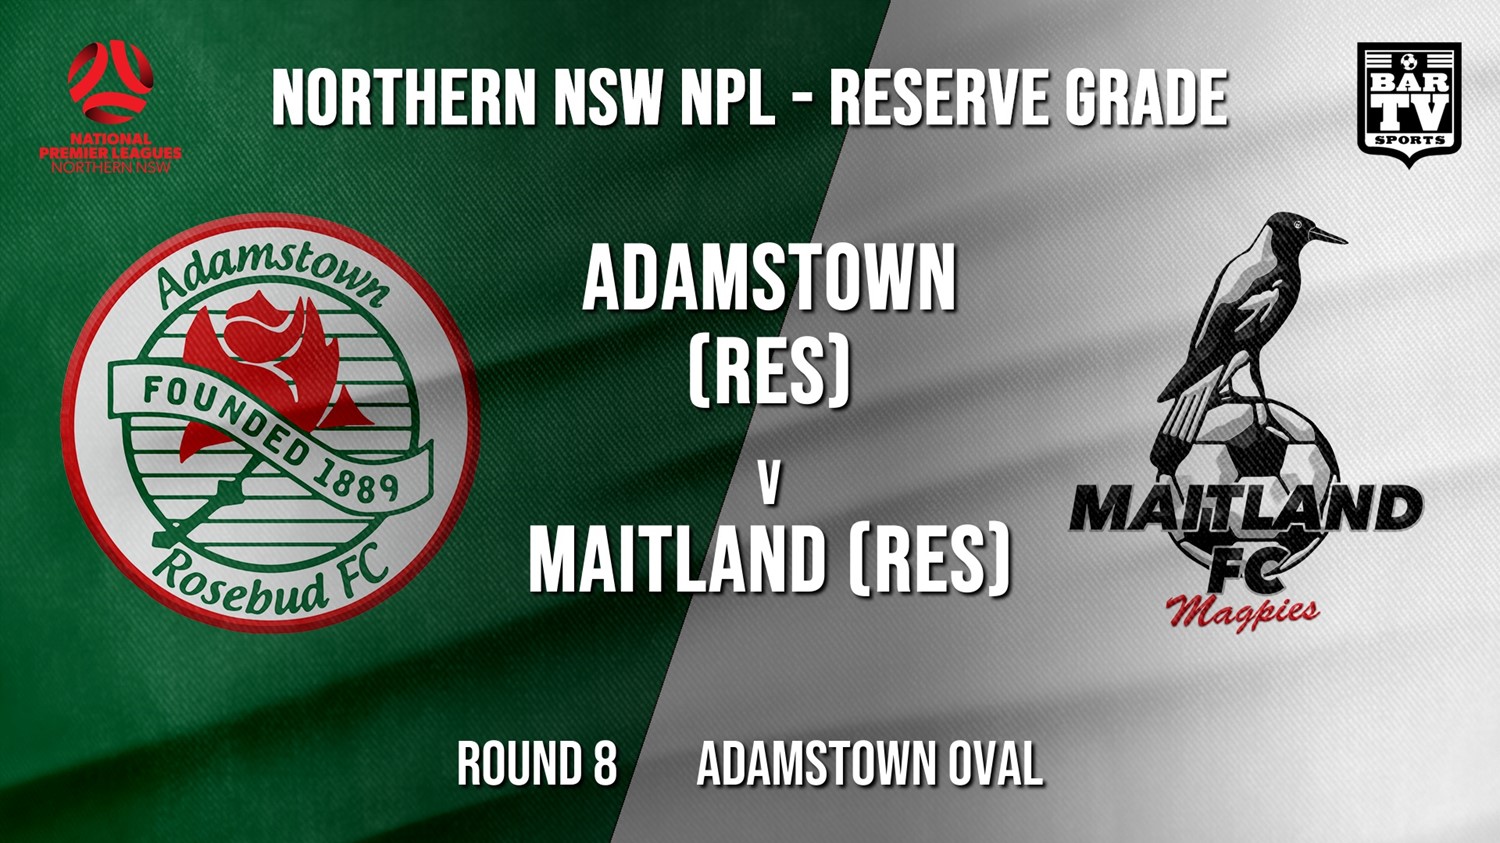 NPL NNSW RES Round 8 - Adamstown Rosebud FC (Res) v Maitland FC (Res) Minigame Slate Image